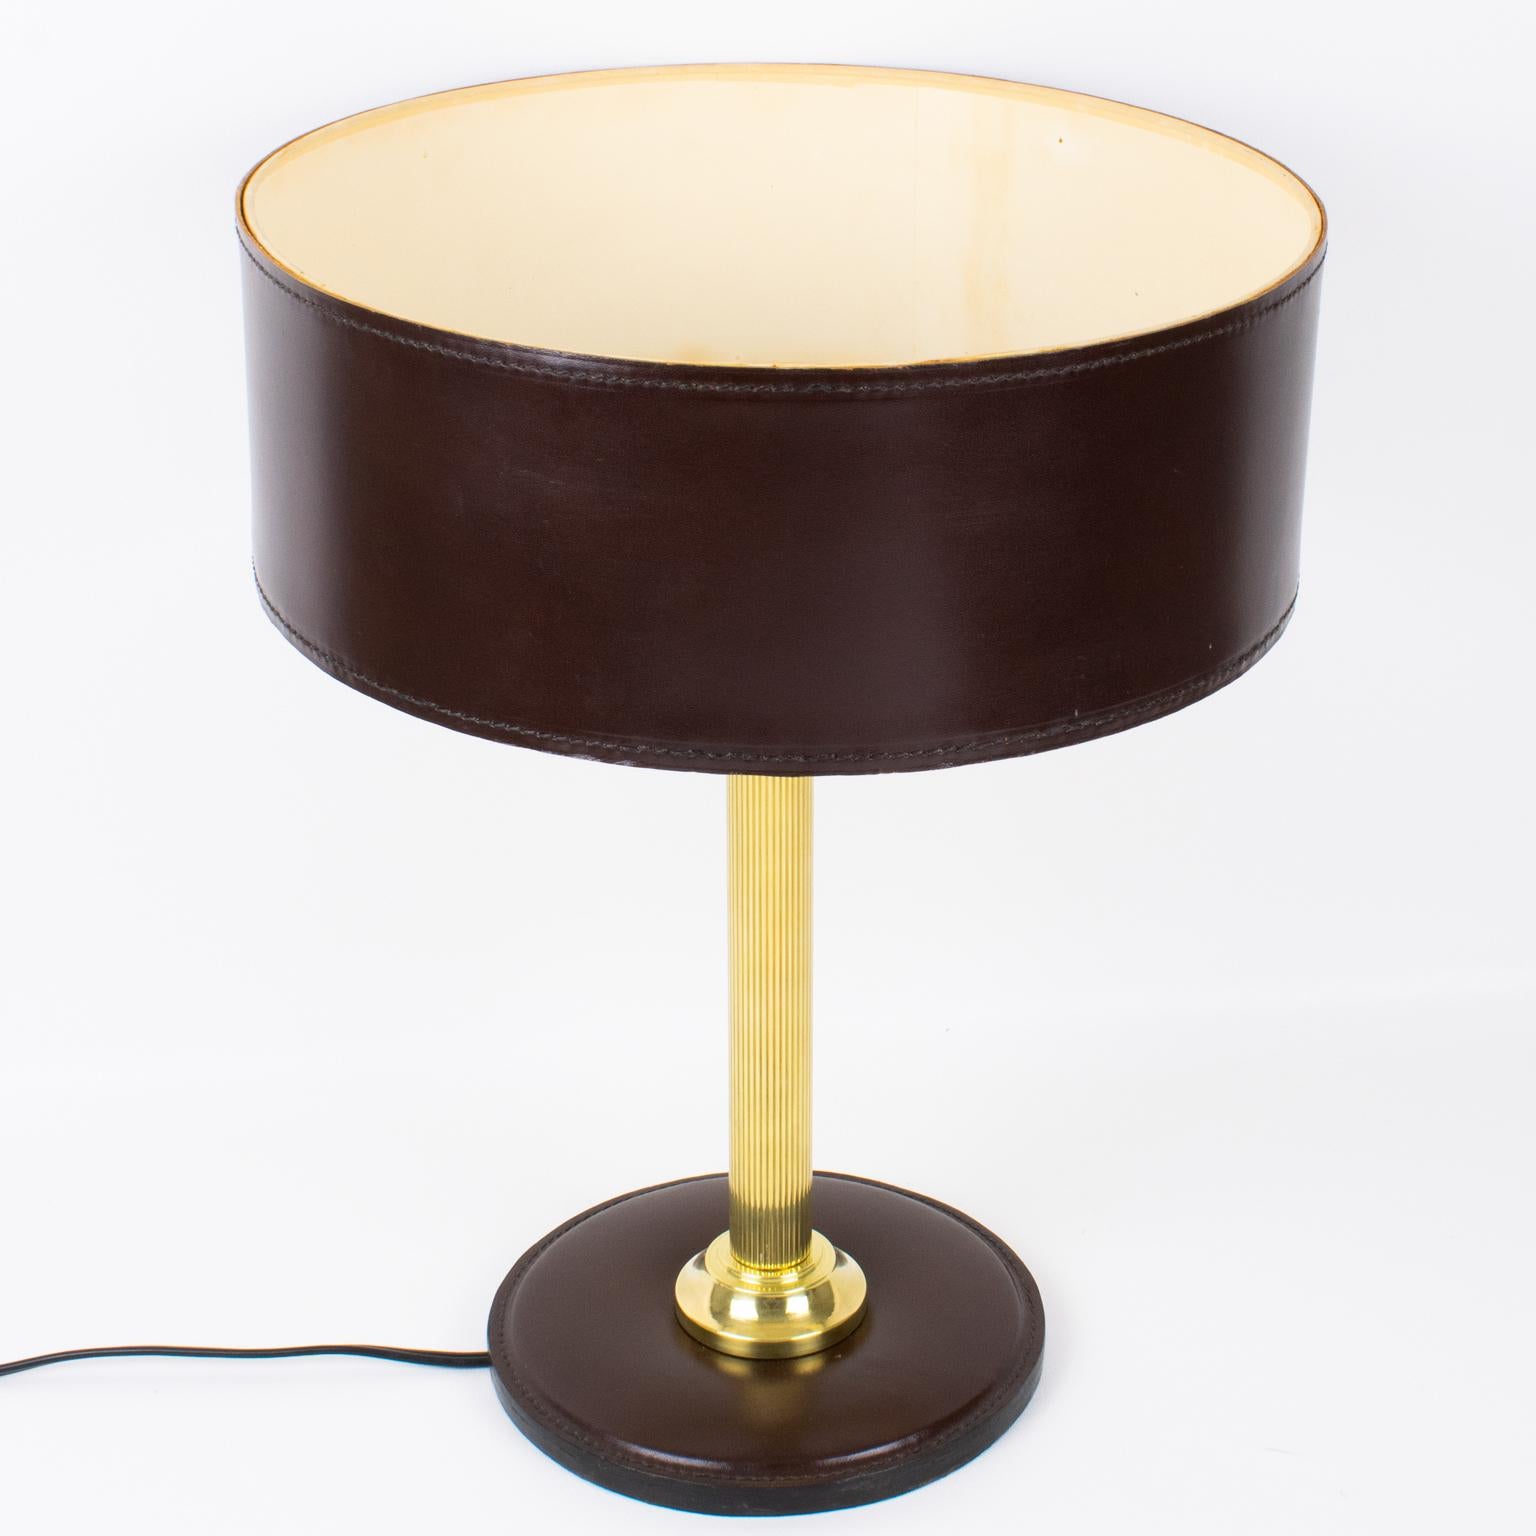 Mid-20th Century Jacques Adnet Brown Hand-Stitched Leather-Clad Table Lamp For Sale